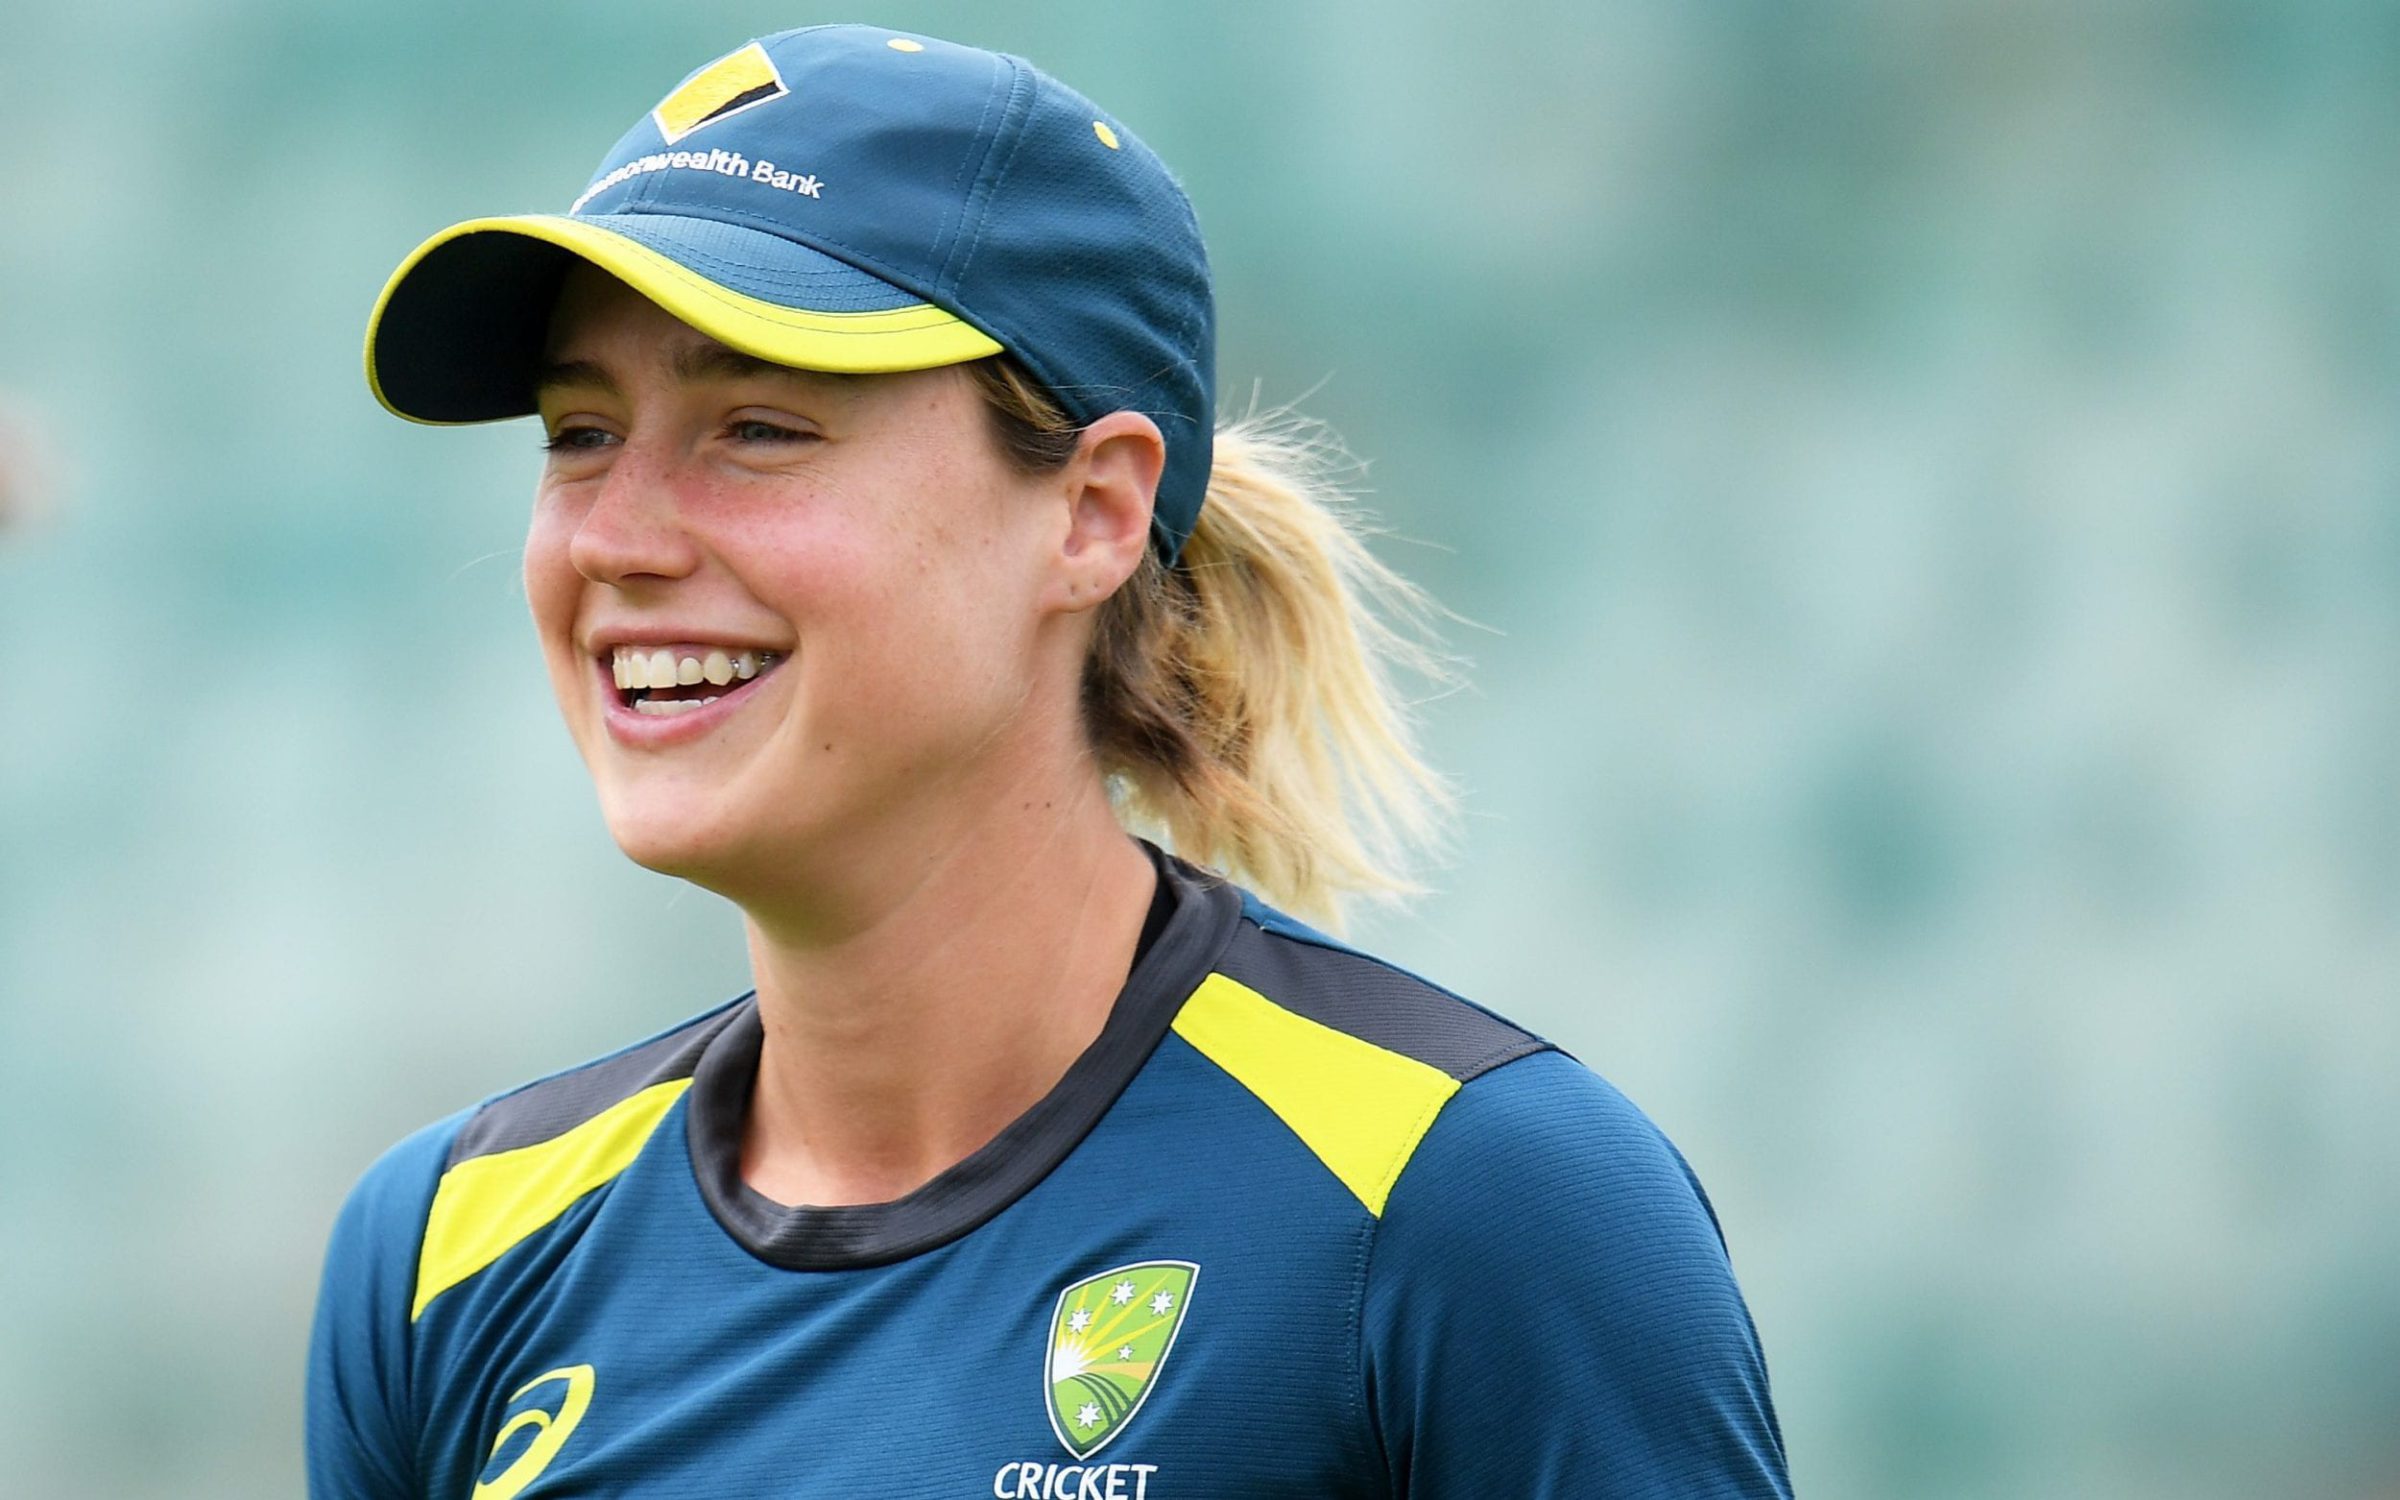 Ellyse Perry suffered from a hamstring injury during Women's T20 World Cup earlier this year